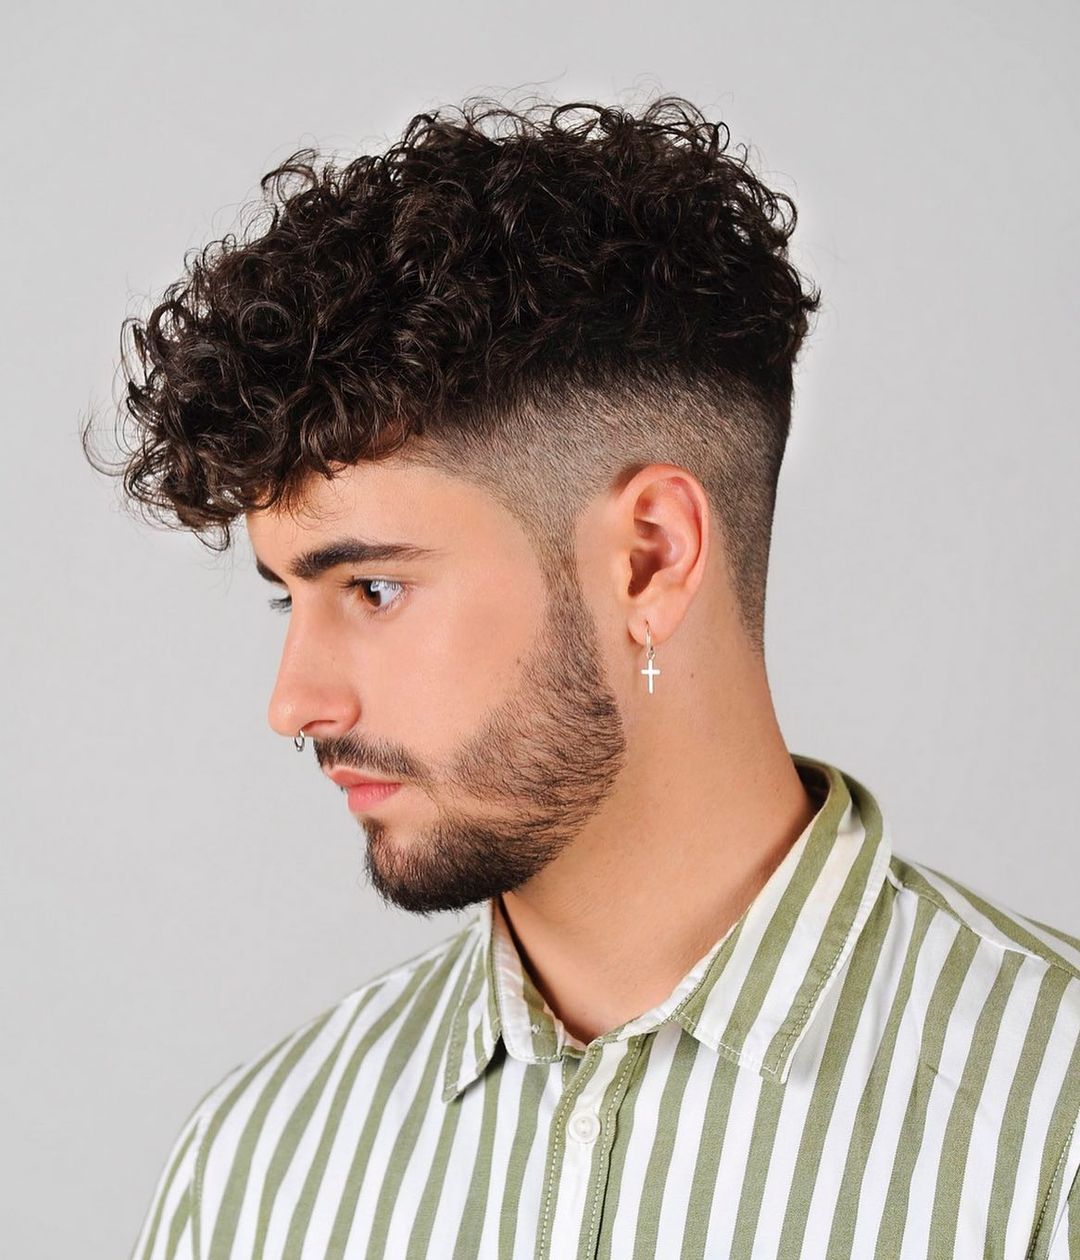 35 Curly Undercut Hairstyles for Men to Rock This Season